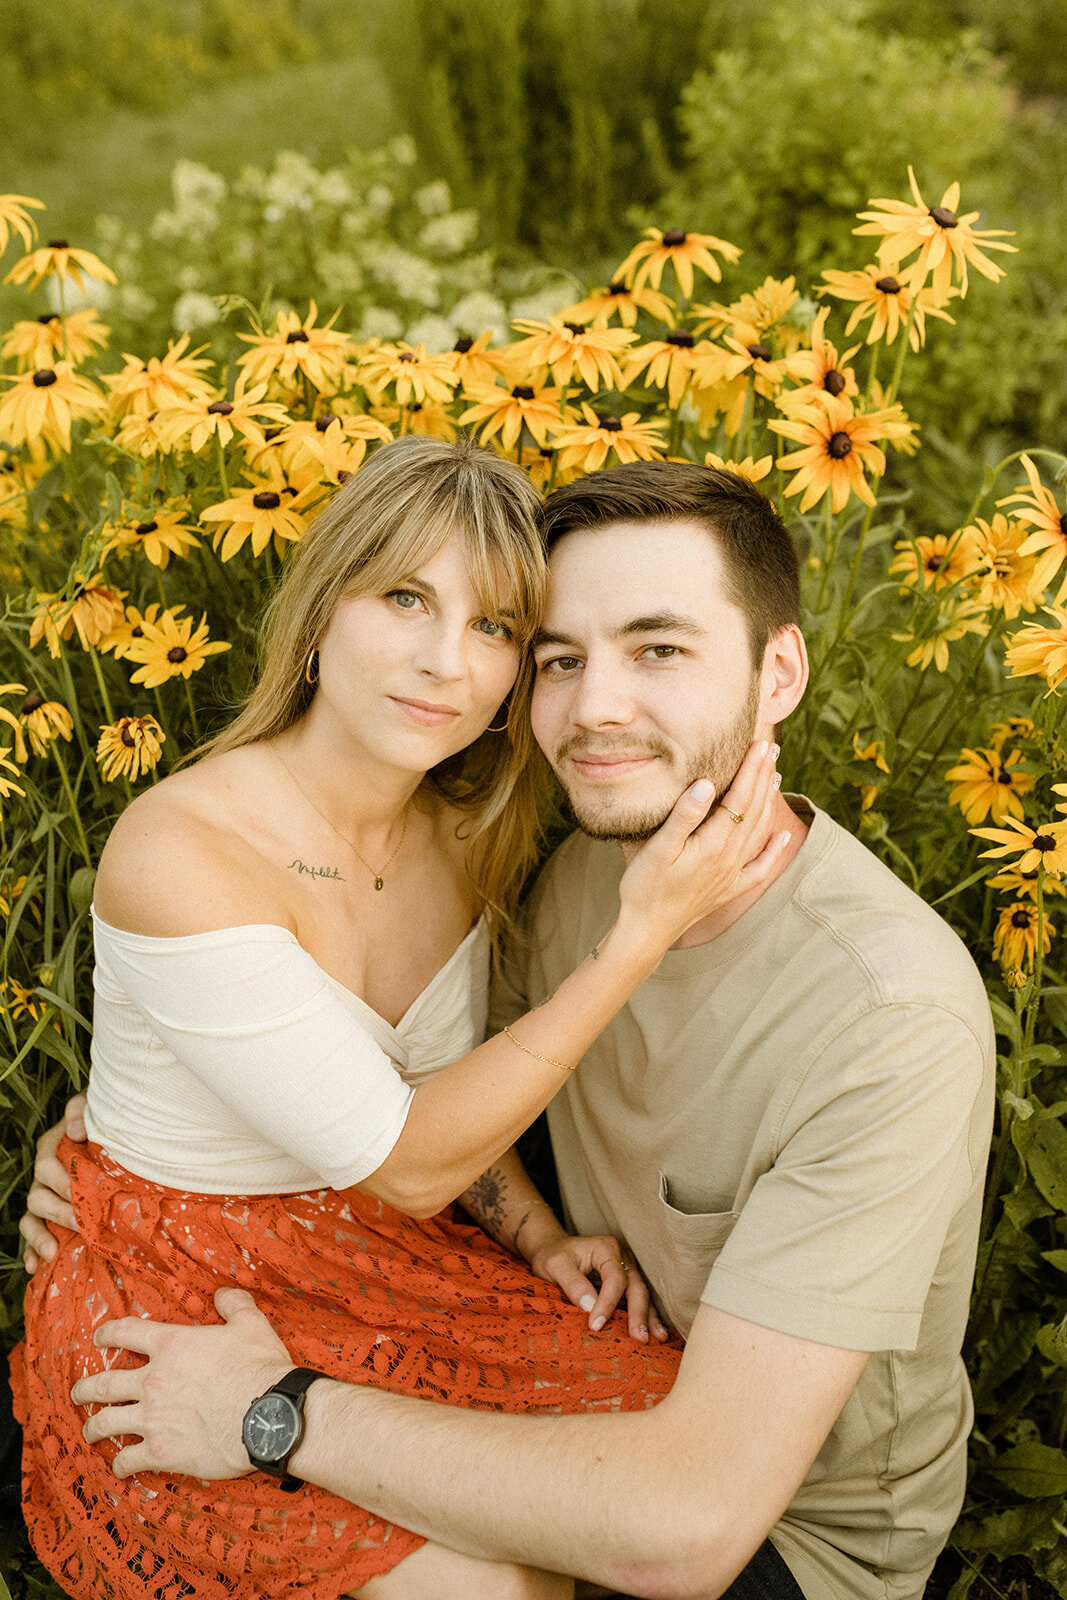 country-cut-flowers-summer-engagement-session-fun-romantic-indie-movie-wanderlust-363